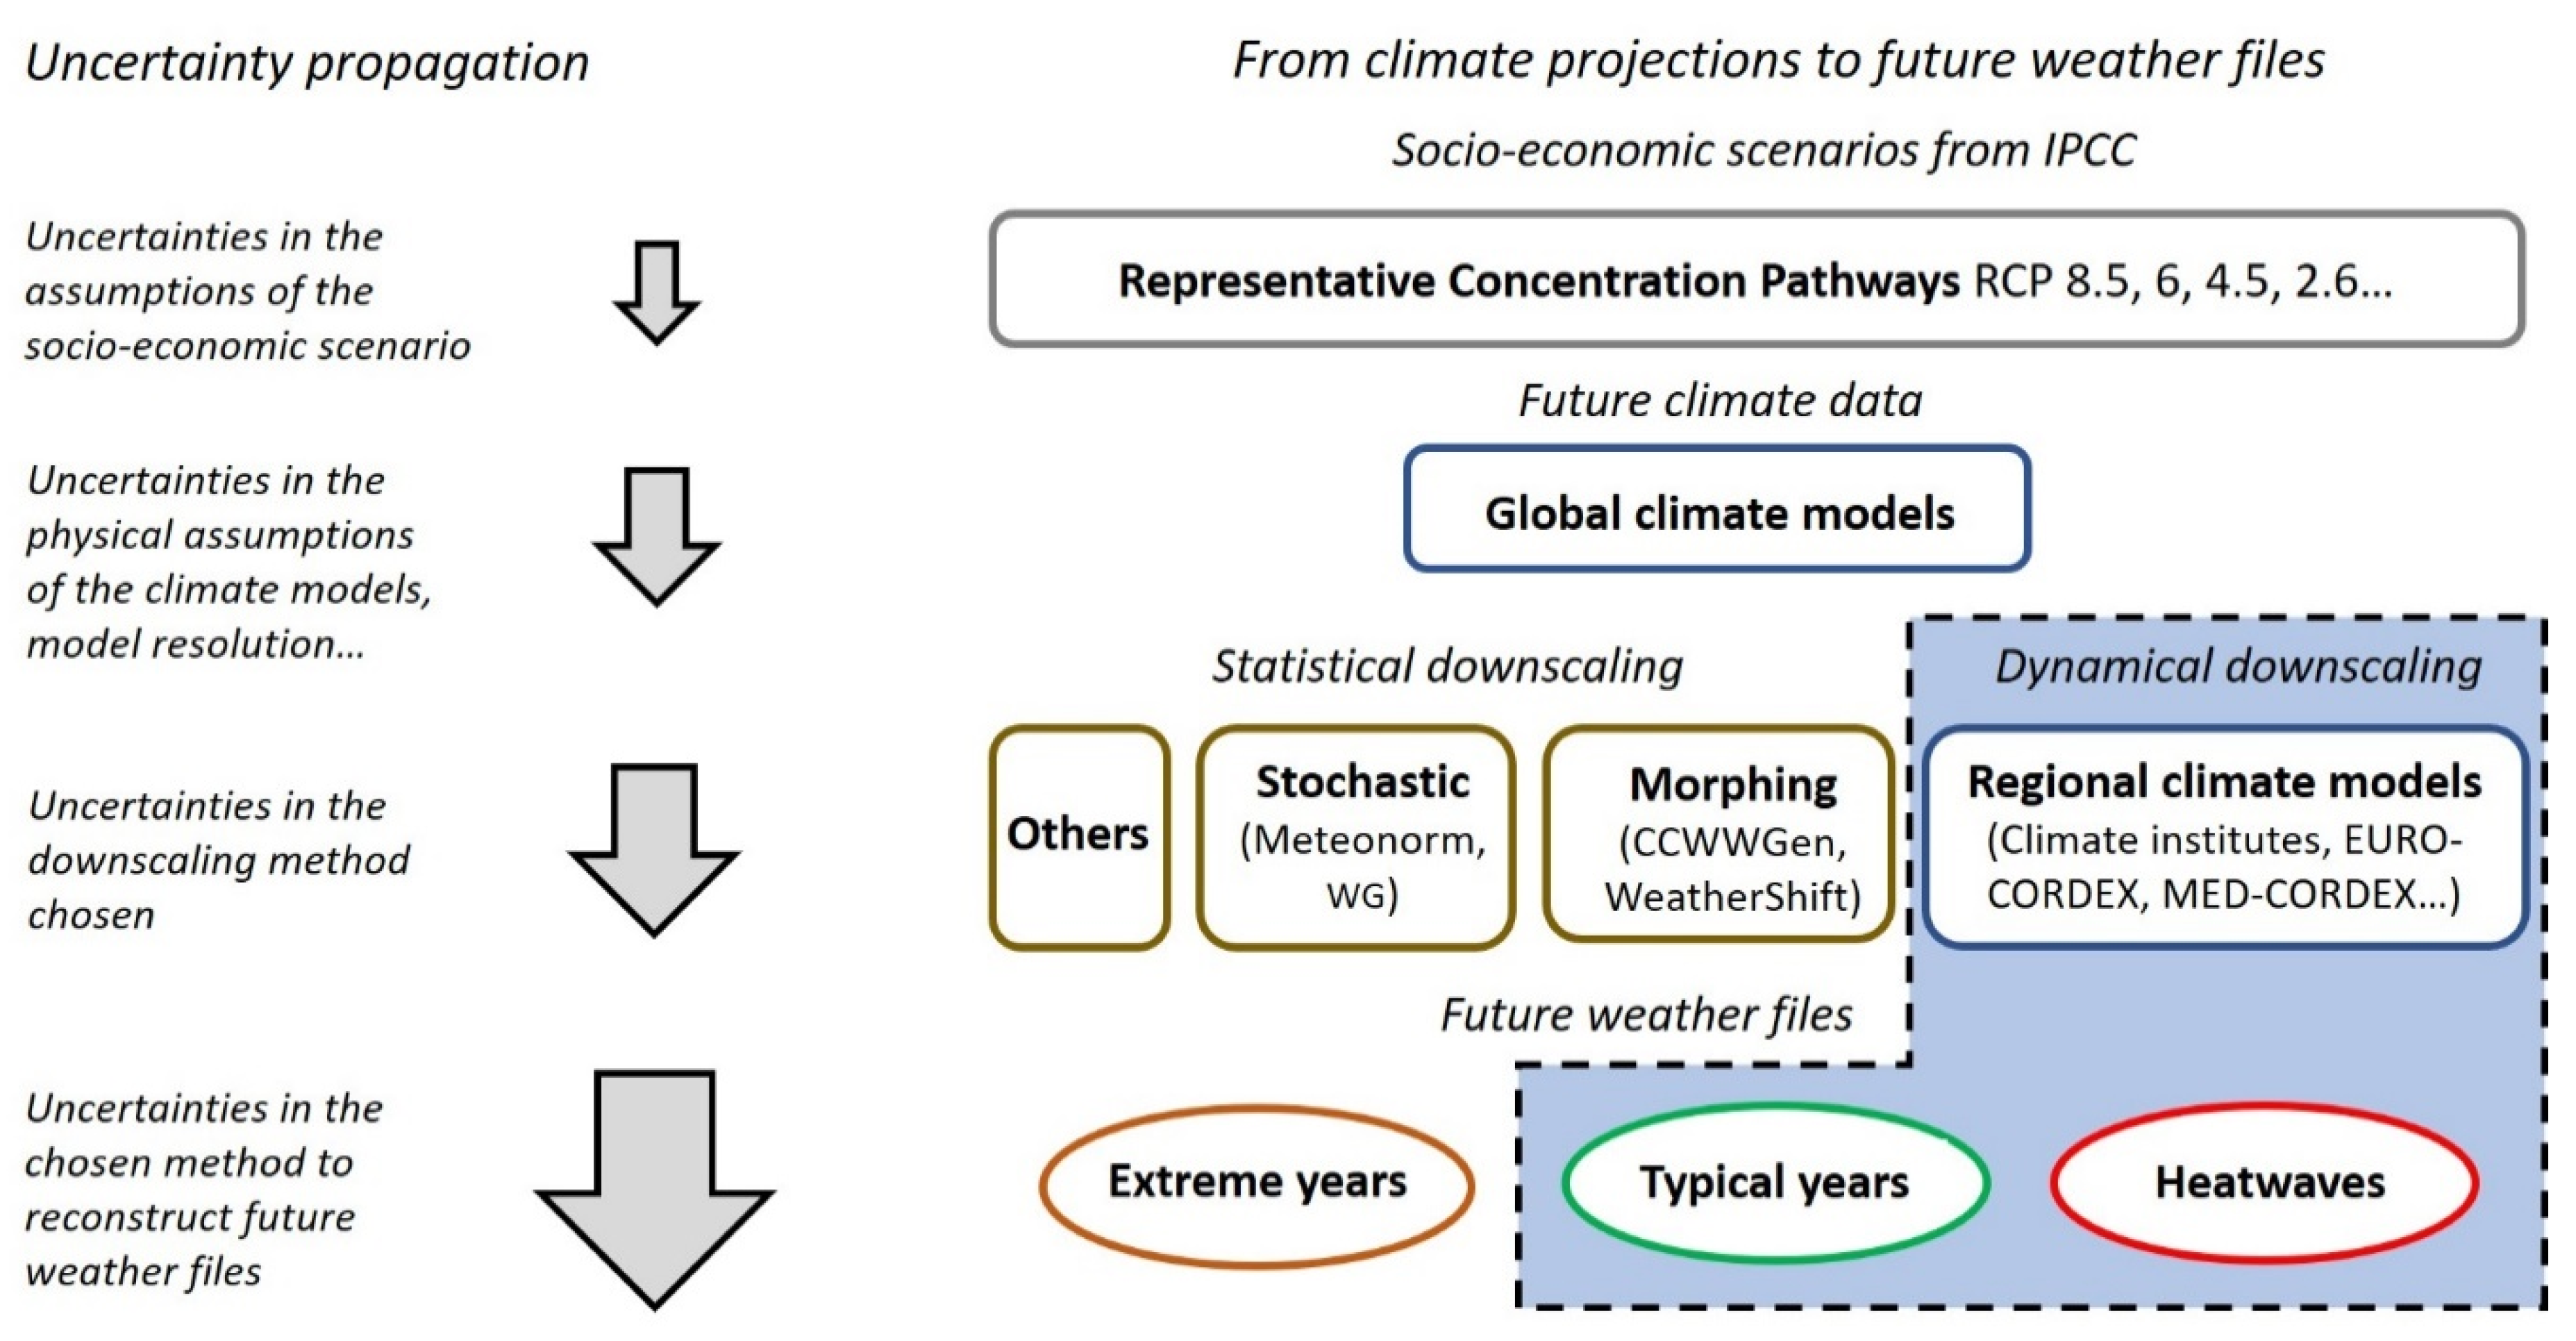 Energies Free Full Text A Methodology For Assembling Future Weather Files Including Heatwaves For Building Thermal Simulations From The European Coordinated Regional Downscaling Experiment Euro Cordex Climate Data Html